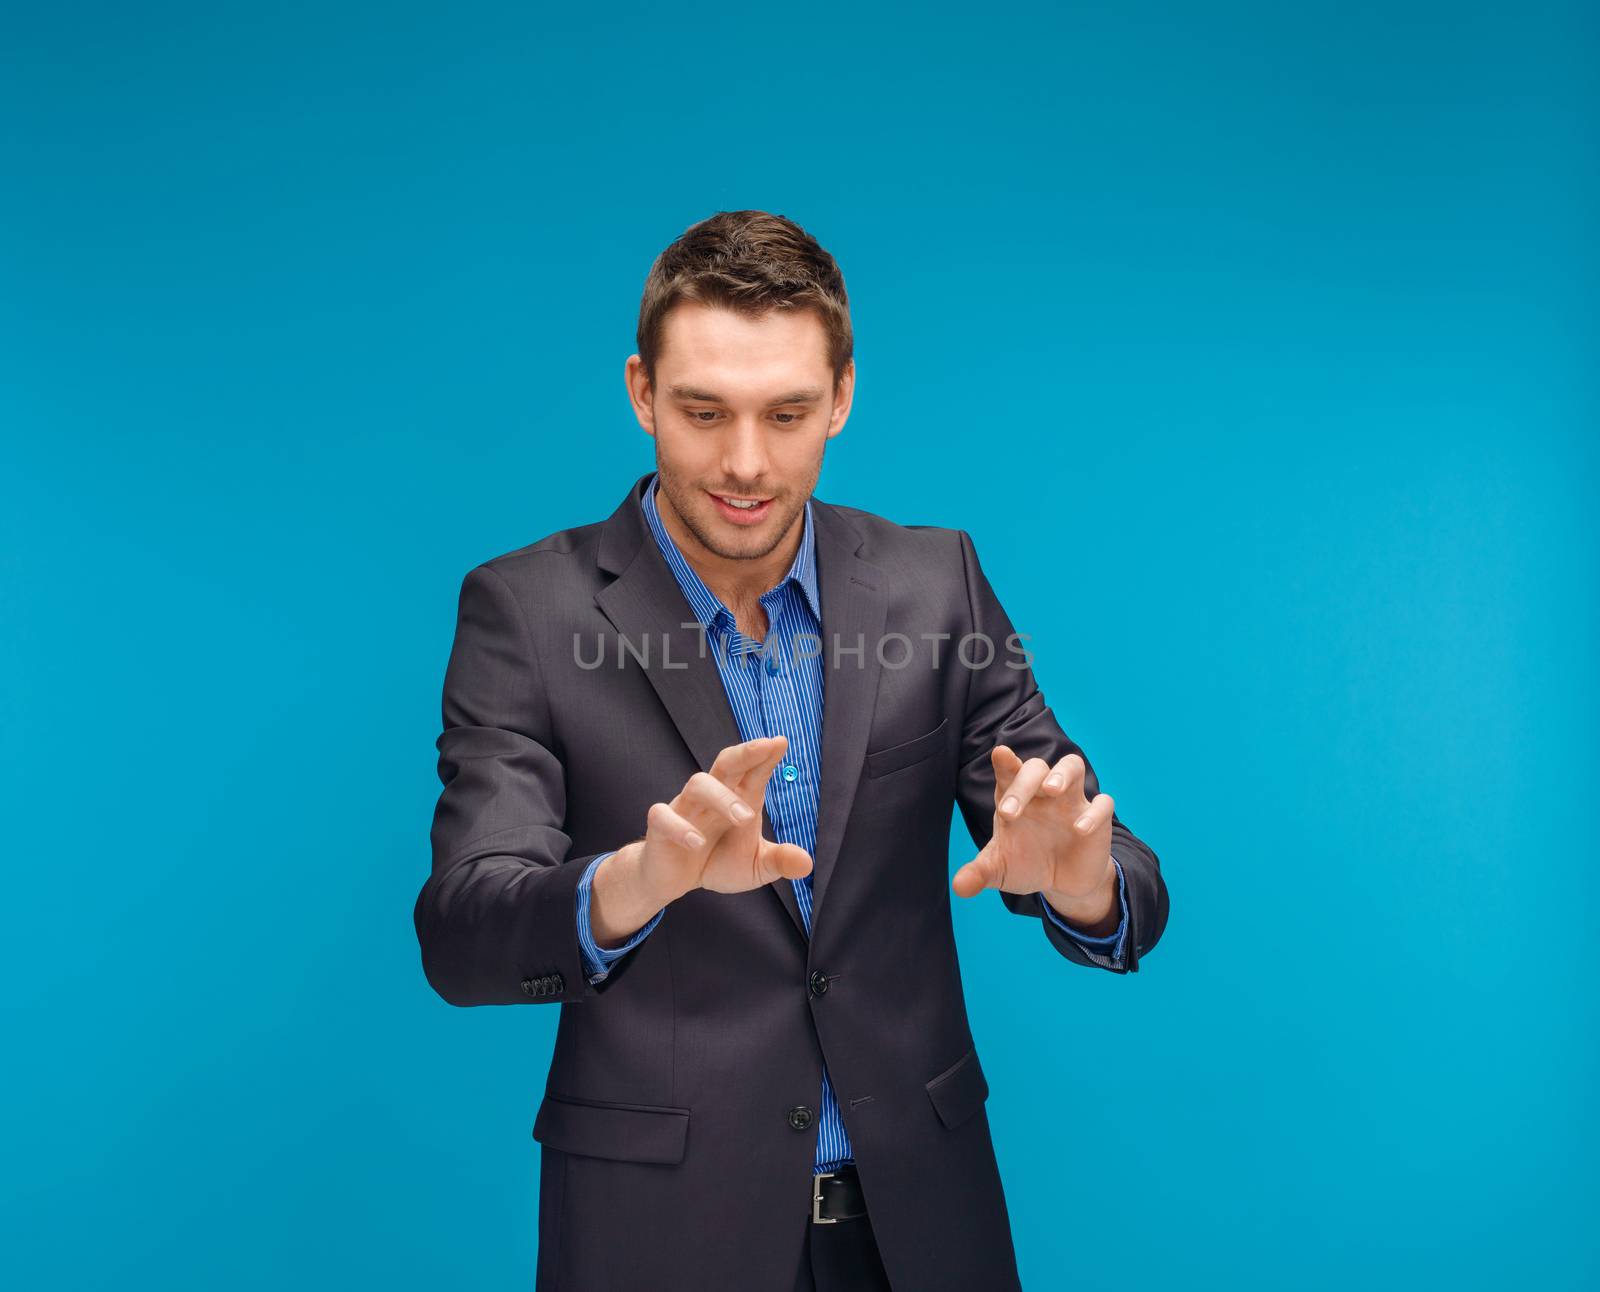 business, technology, communication concept - businessman working with imaginary virtual screen